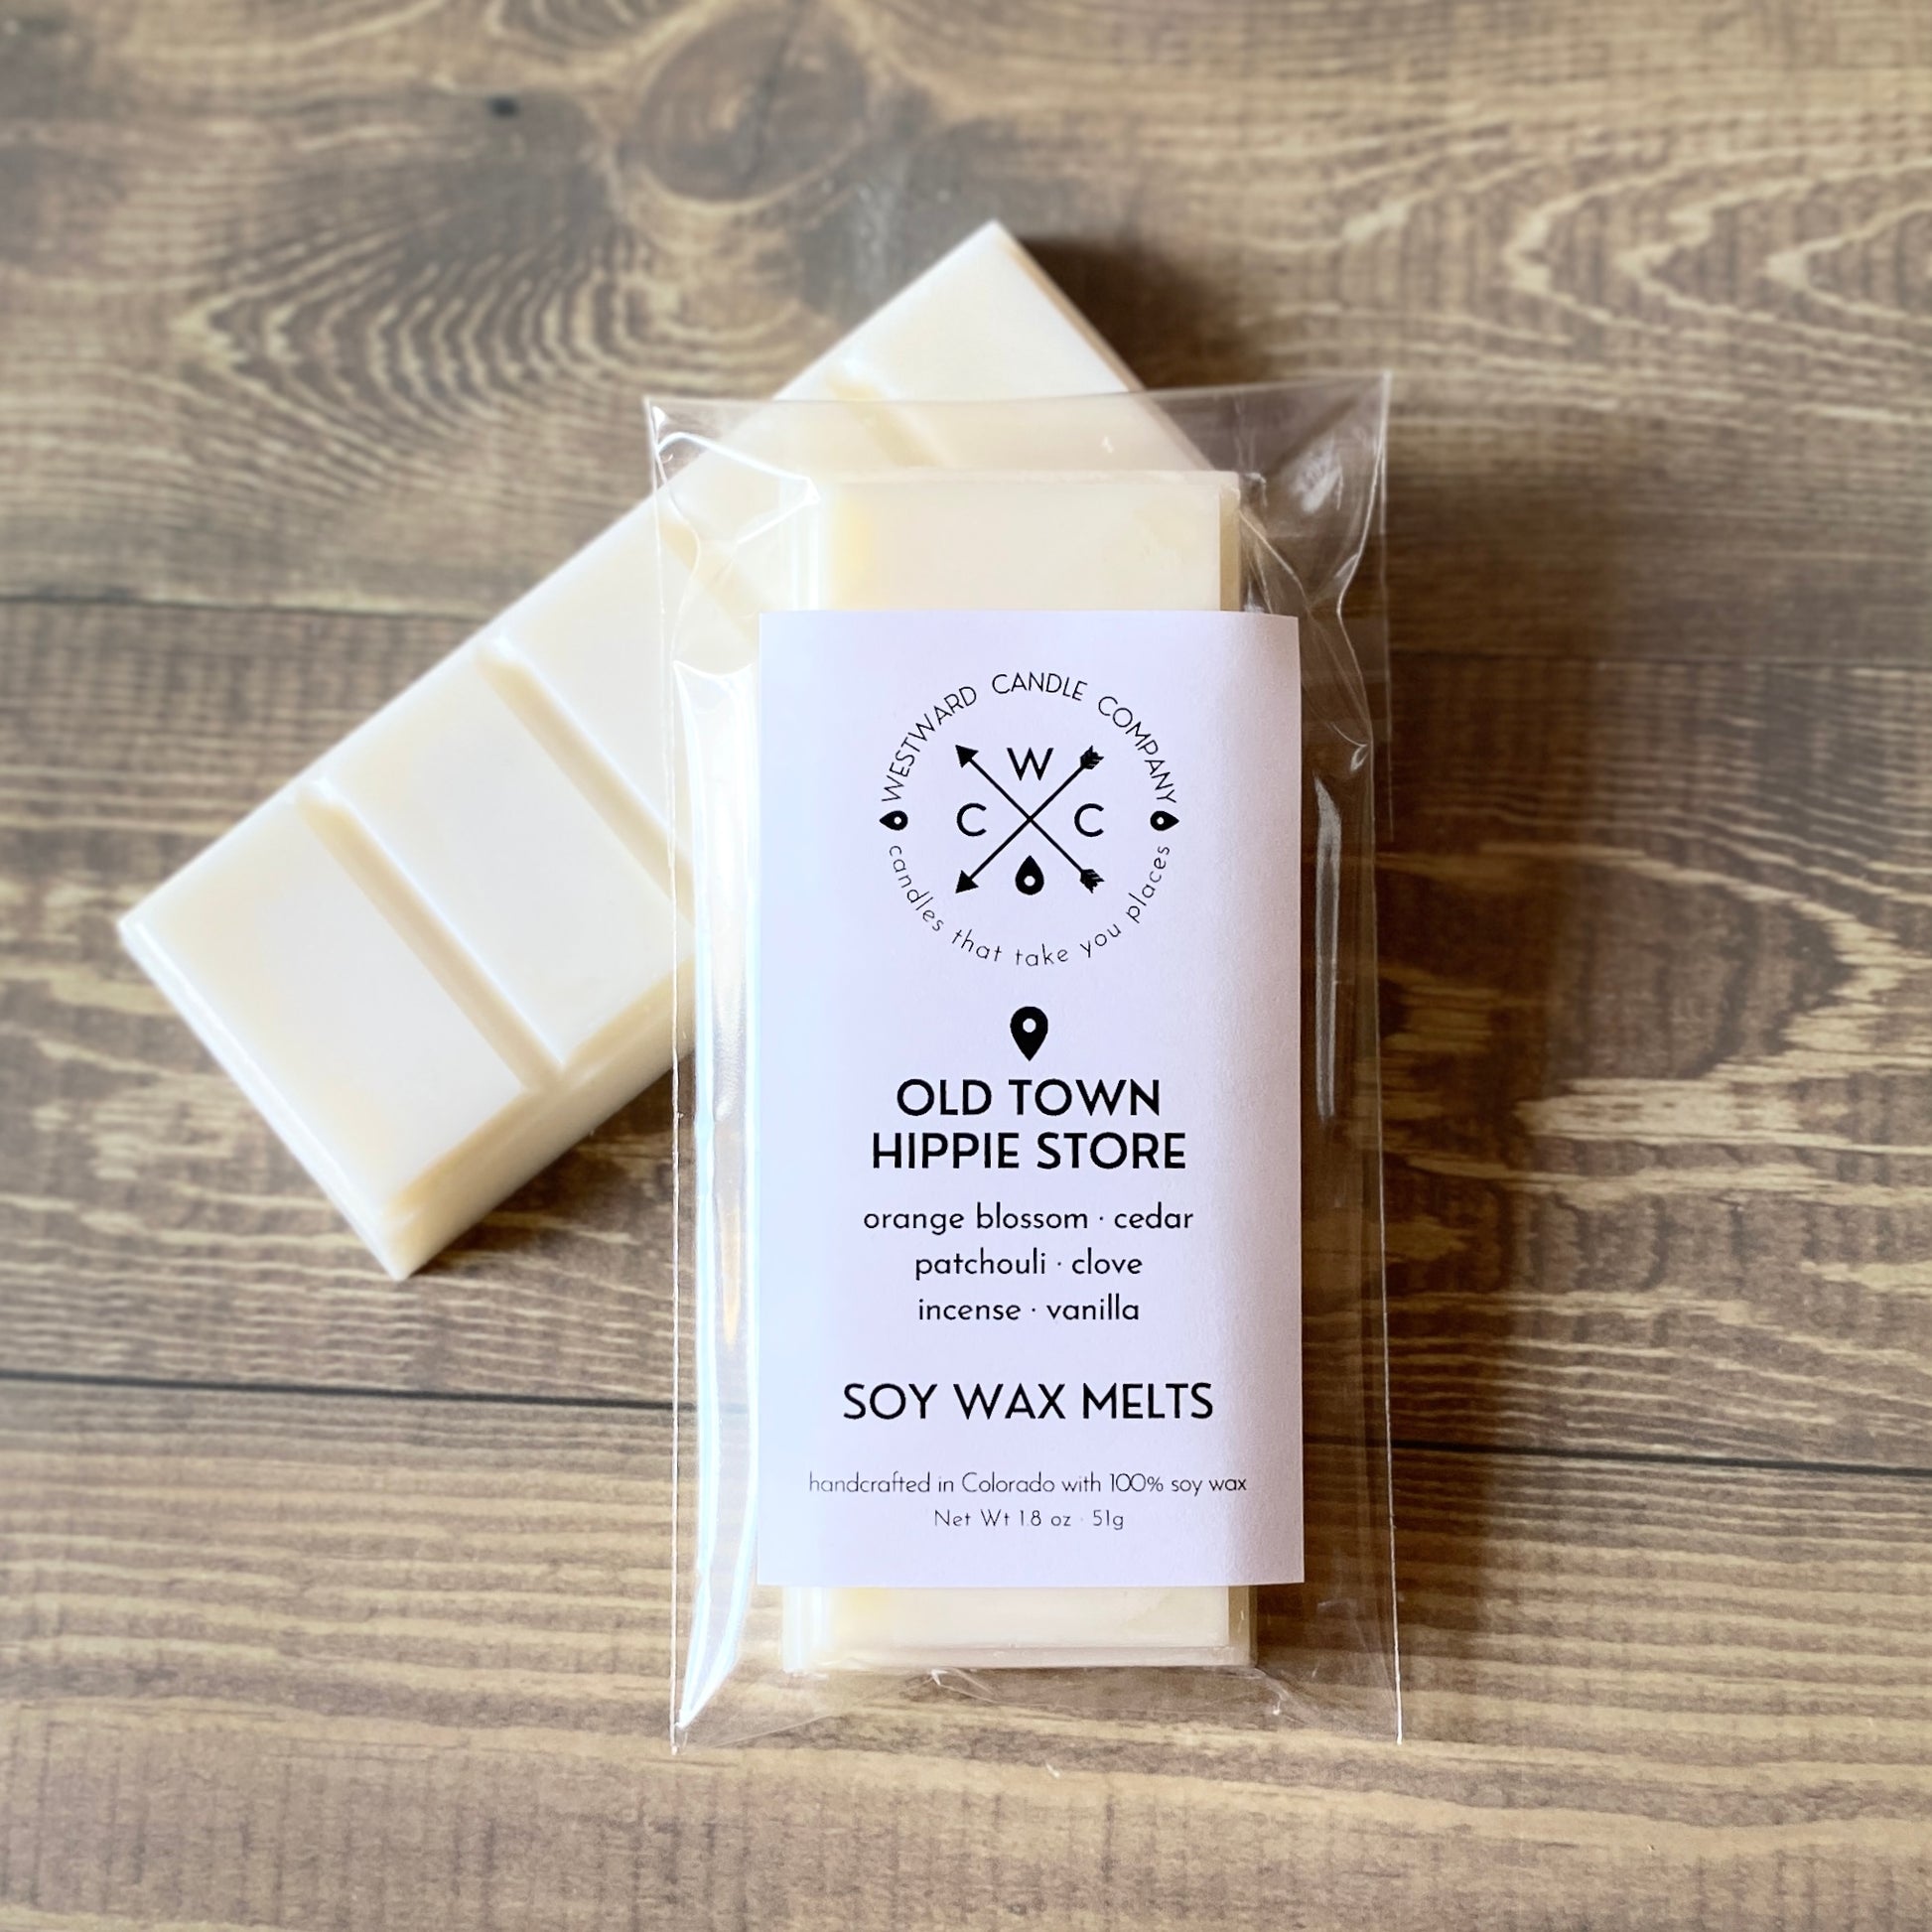 Old Town Hippie Store Wax Melts - Westward Candle Company 